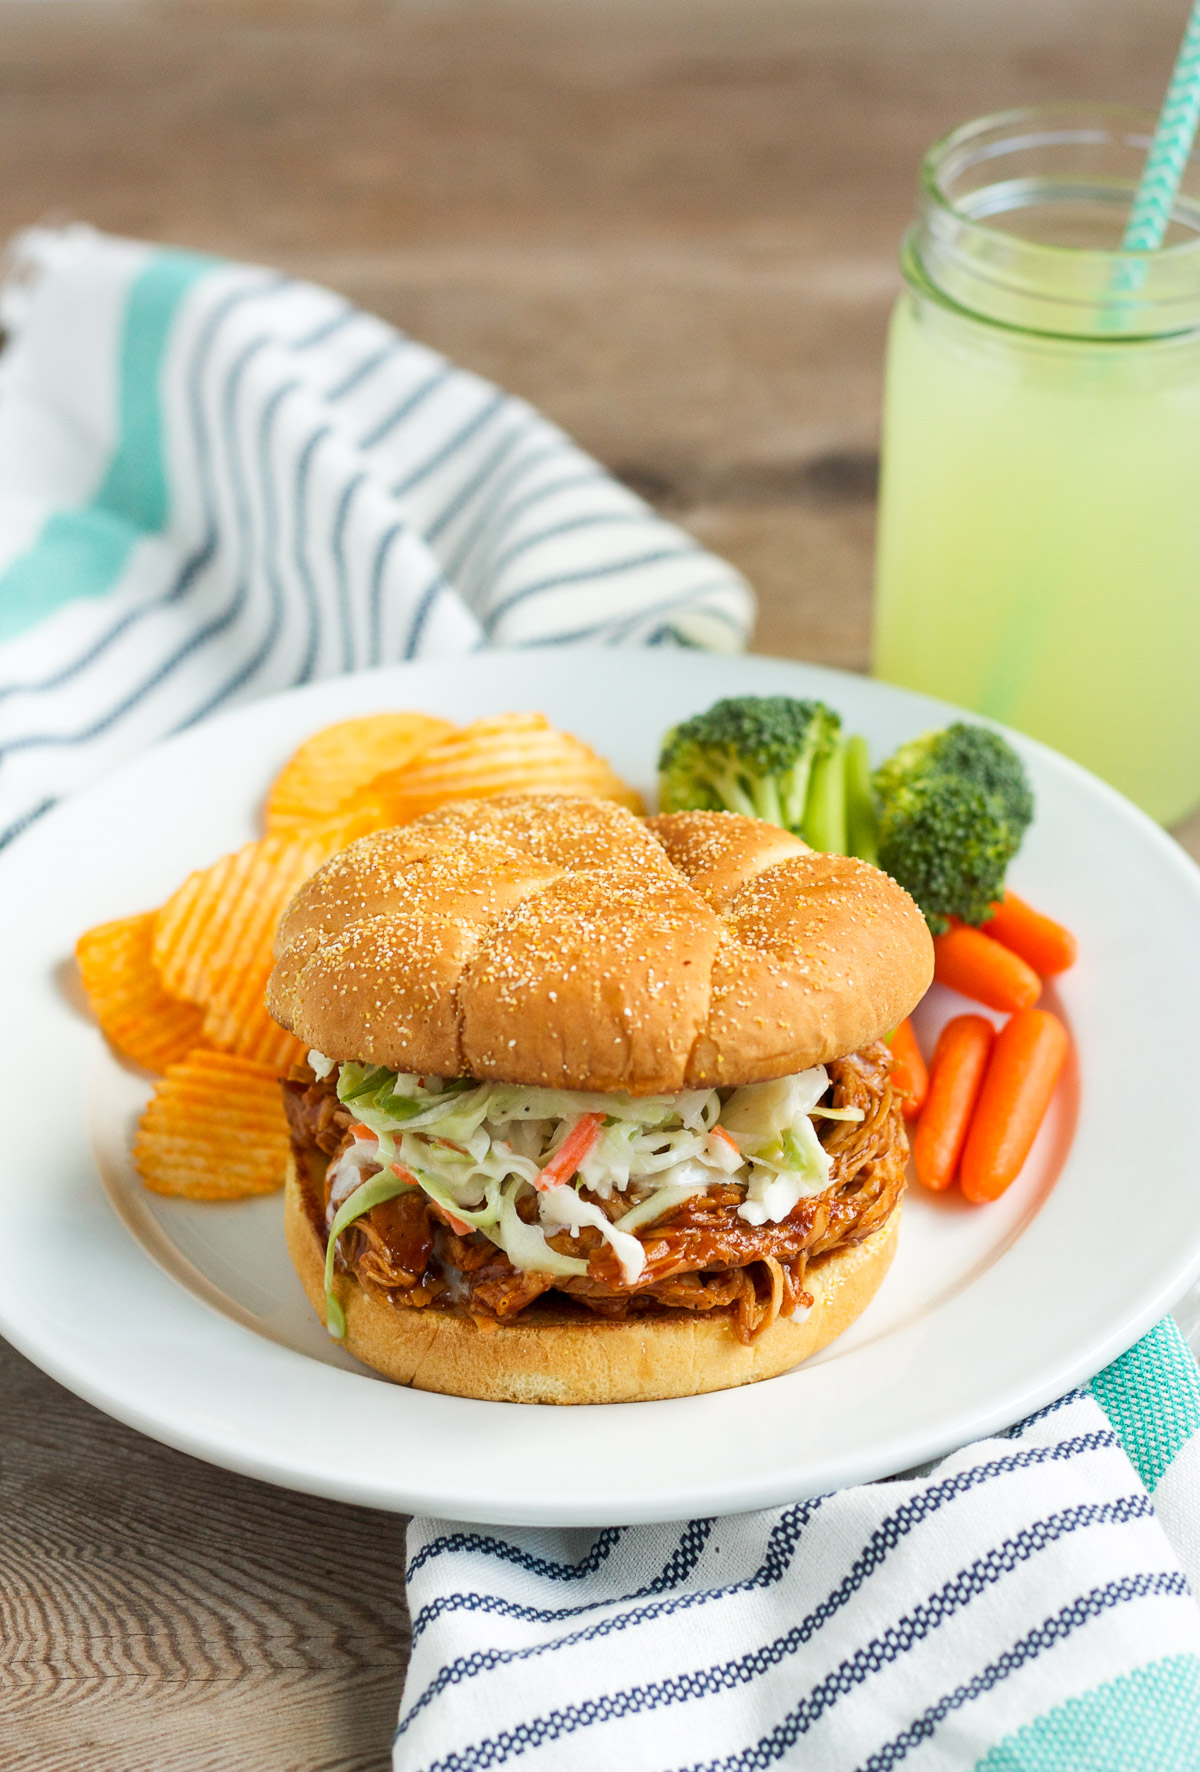 These barbecue chicken sandwiches are served on a buttered, griddled bun, and topped with creamy, homemade cole slaw. You'll want to eat them every week!